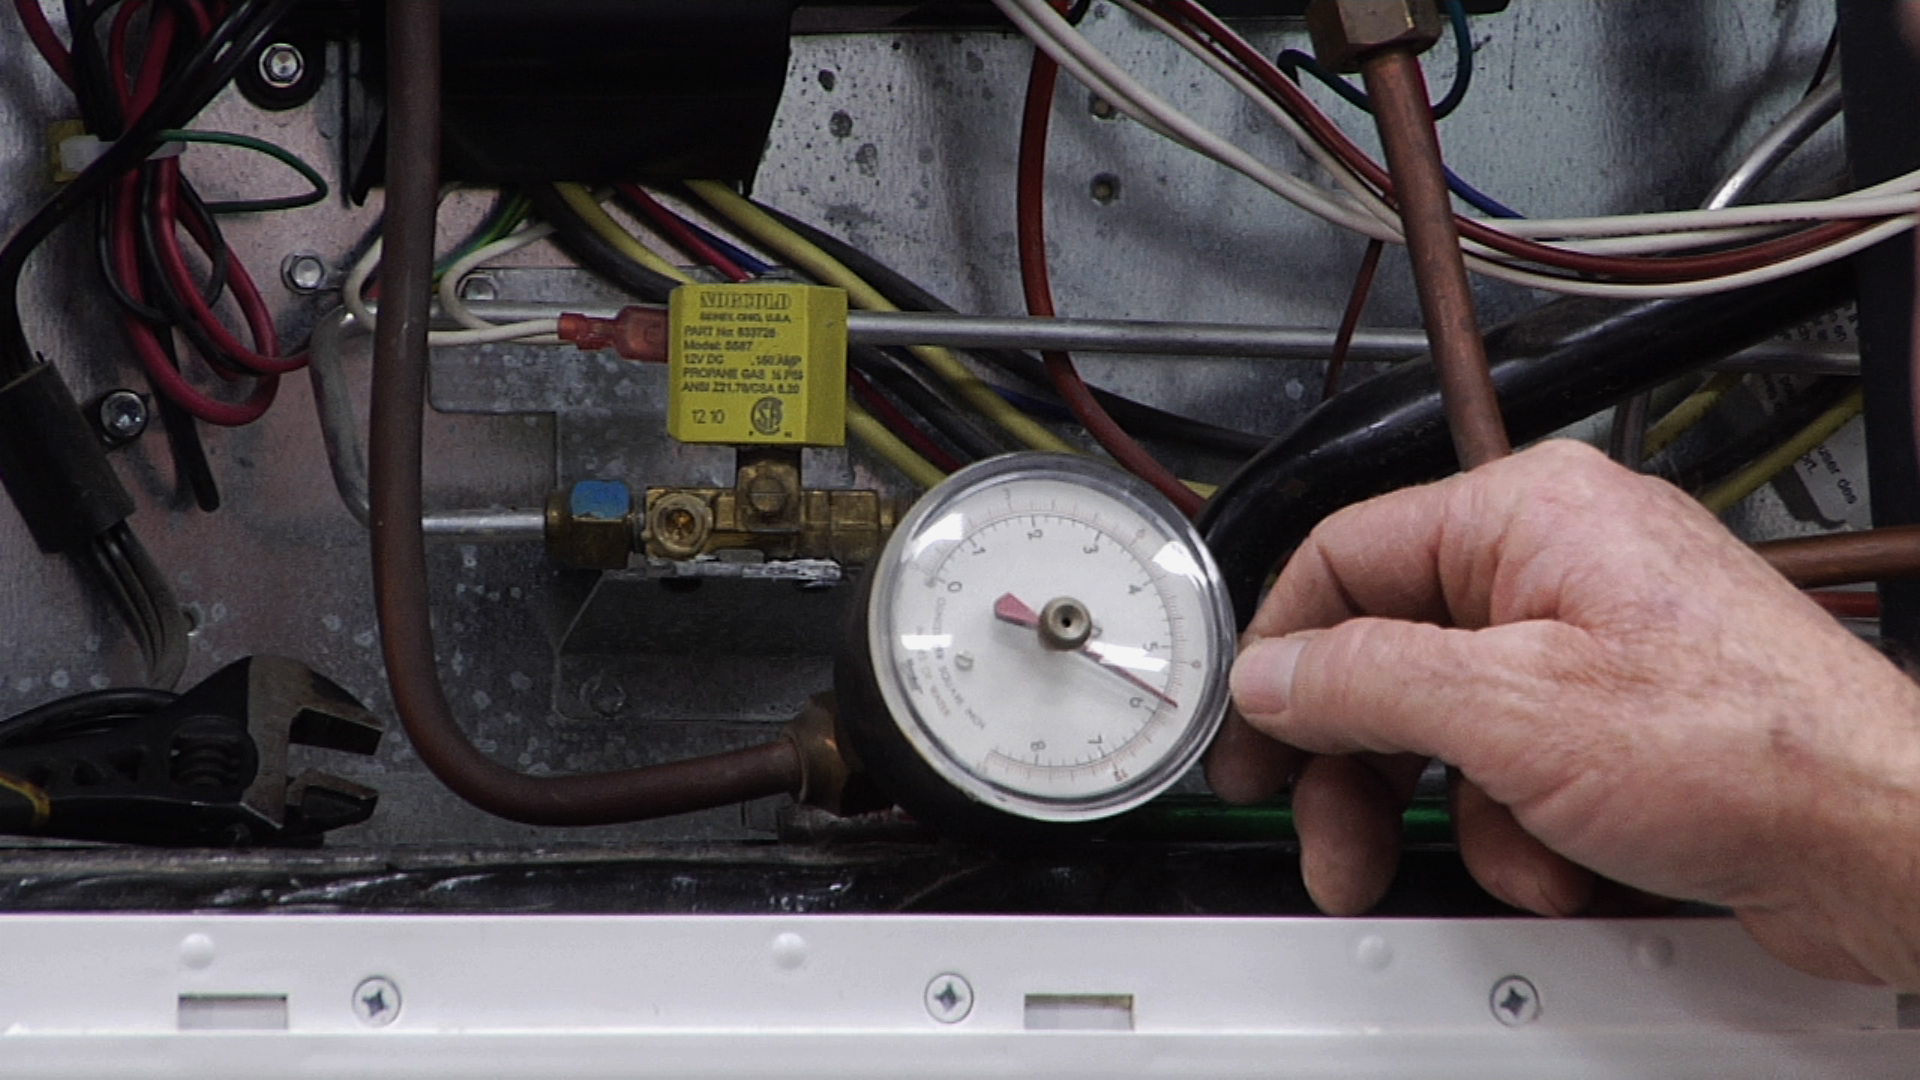 Keep Your System Safe by Installing an RV Propane Leak Detectorproduct featured image thumbnail.